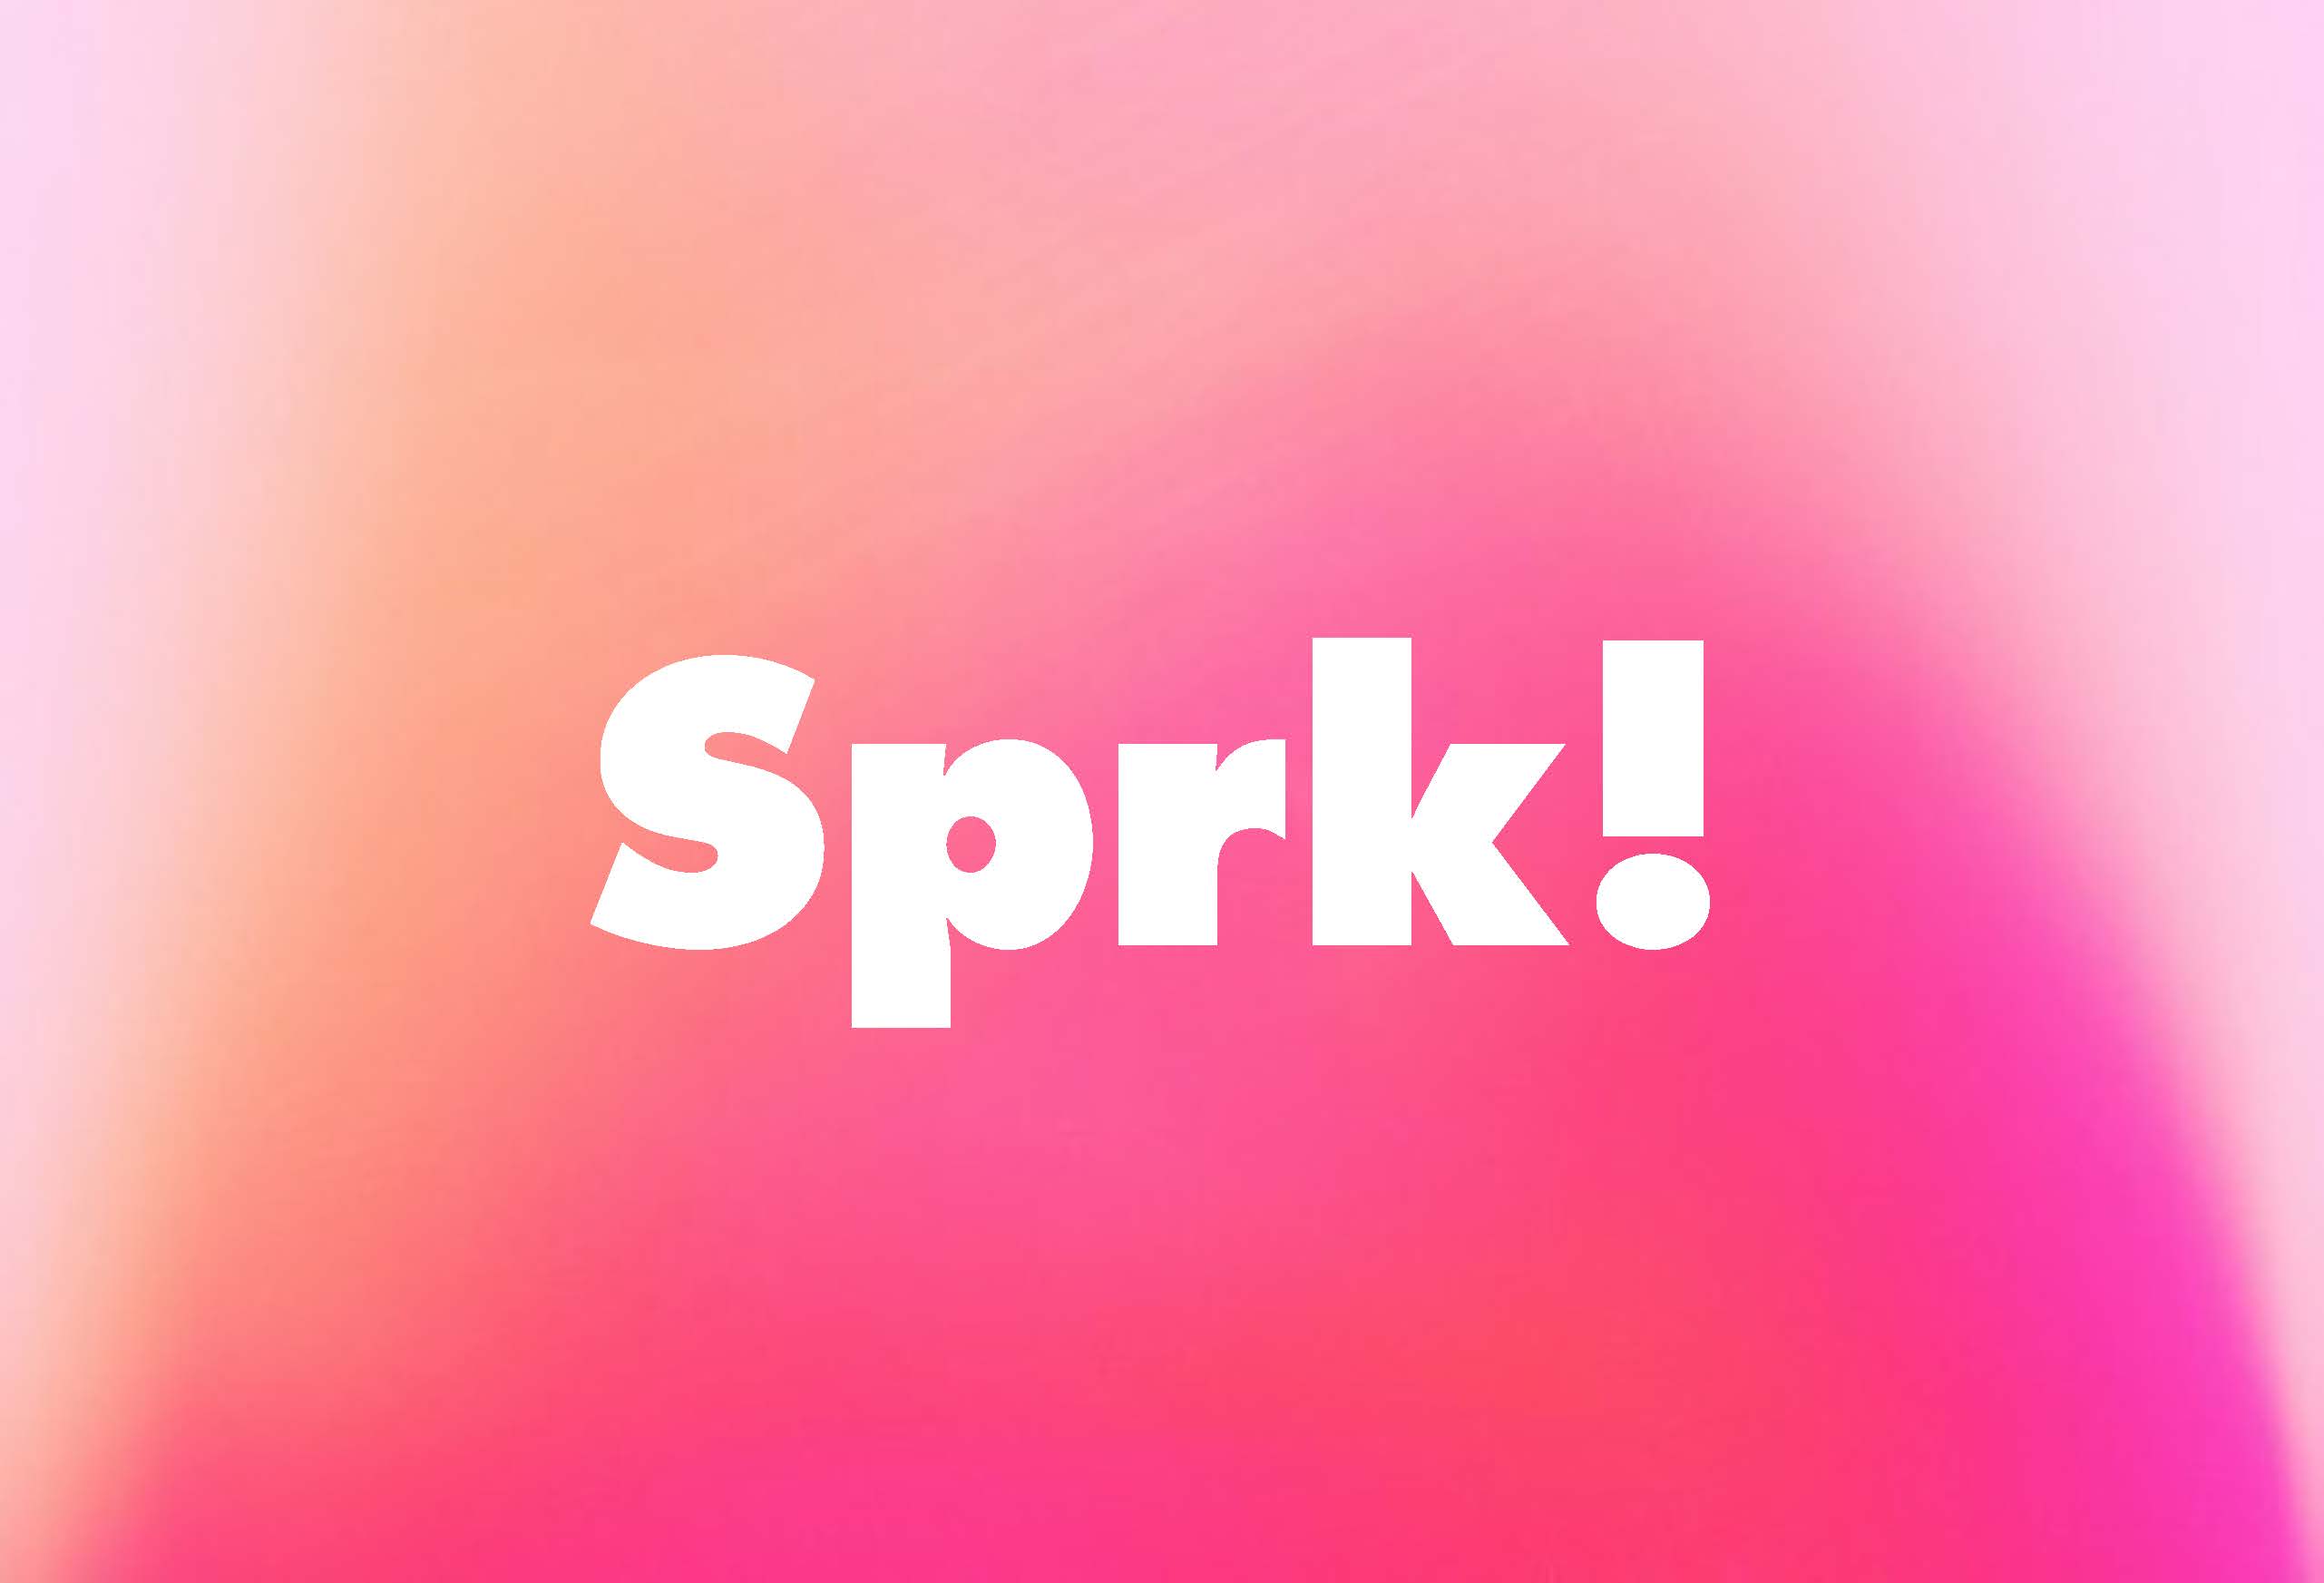 A white text logo on a pin, orange and purple gradient. The text says: Spark!